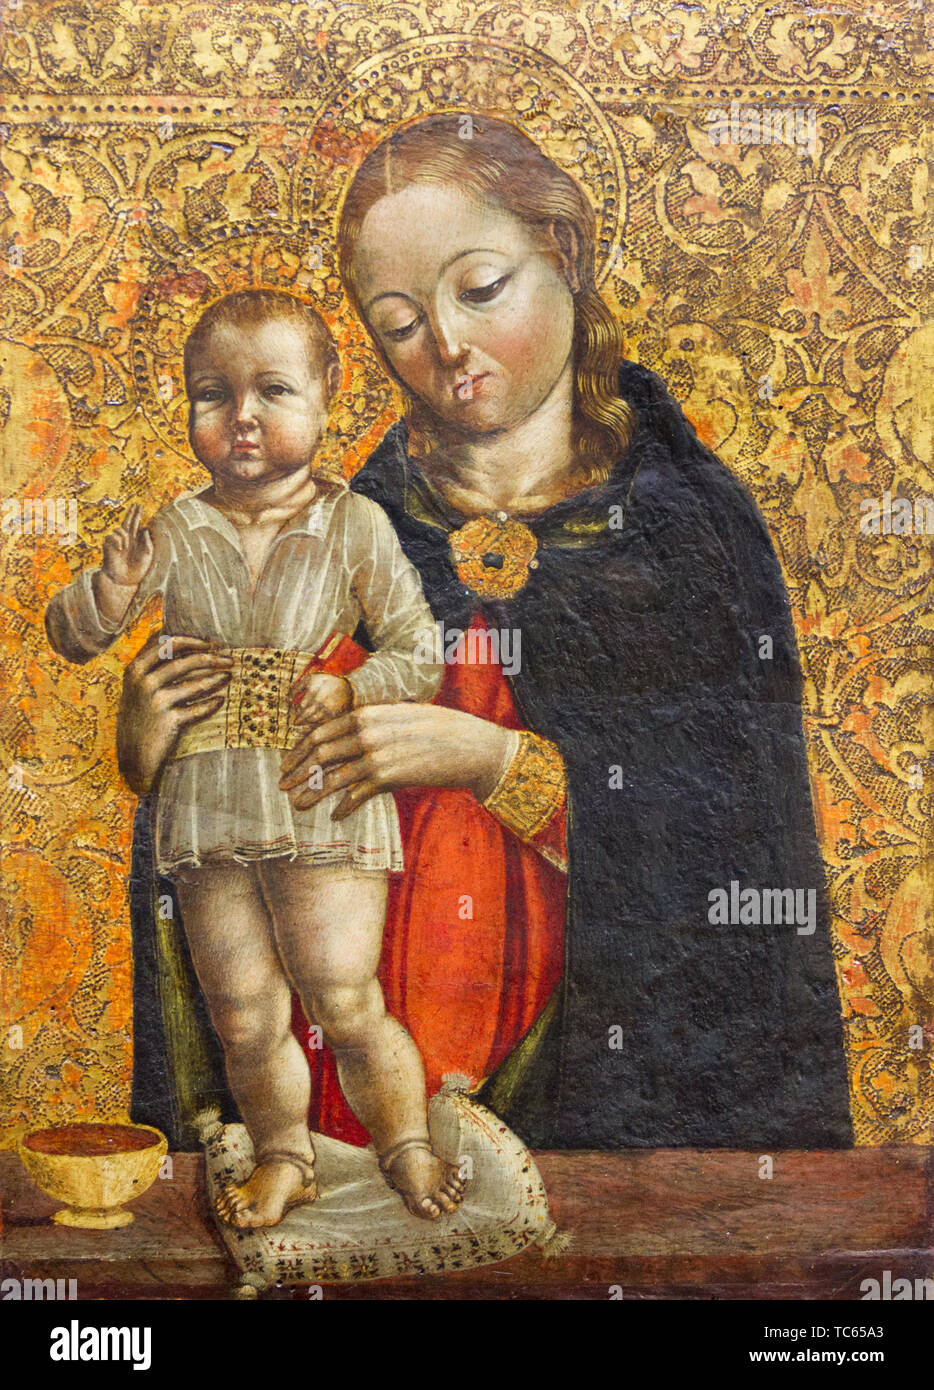 The Virgin Mary with the blessing Infant Jesus in her arms. Currently in Castello Visconteo. Stock Photo